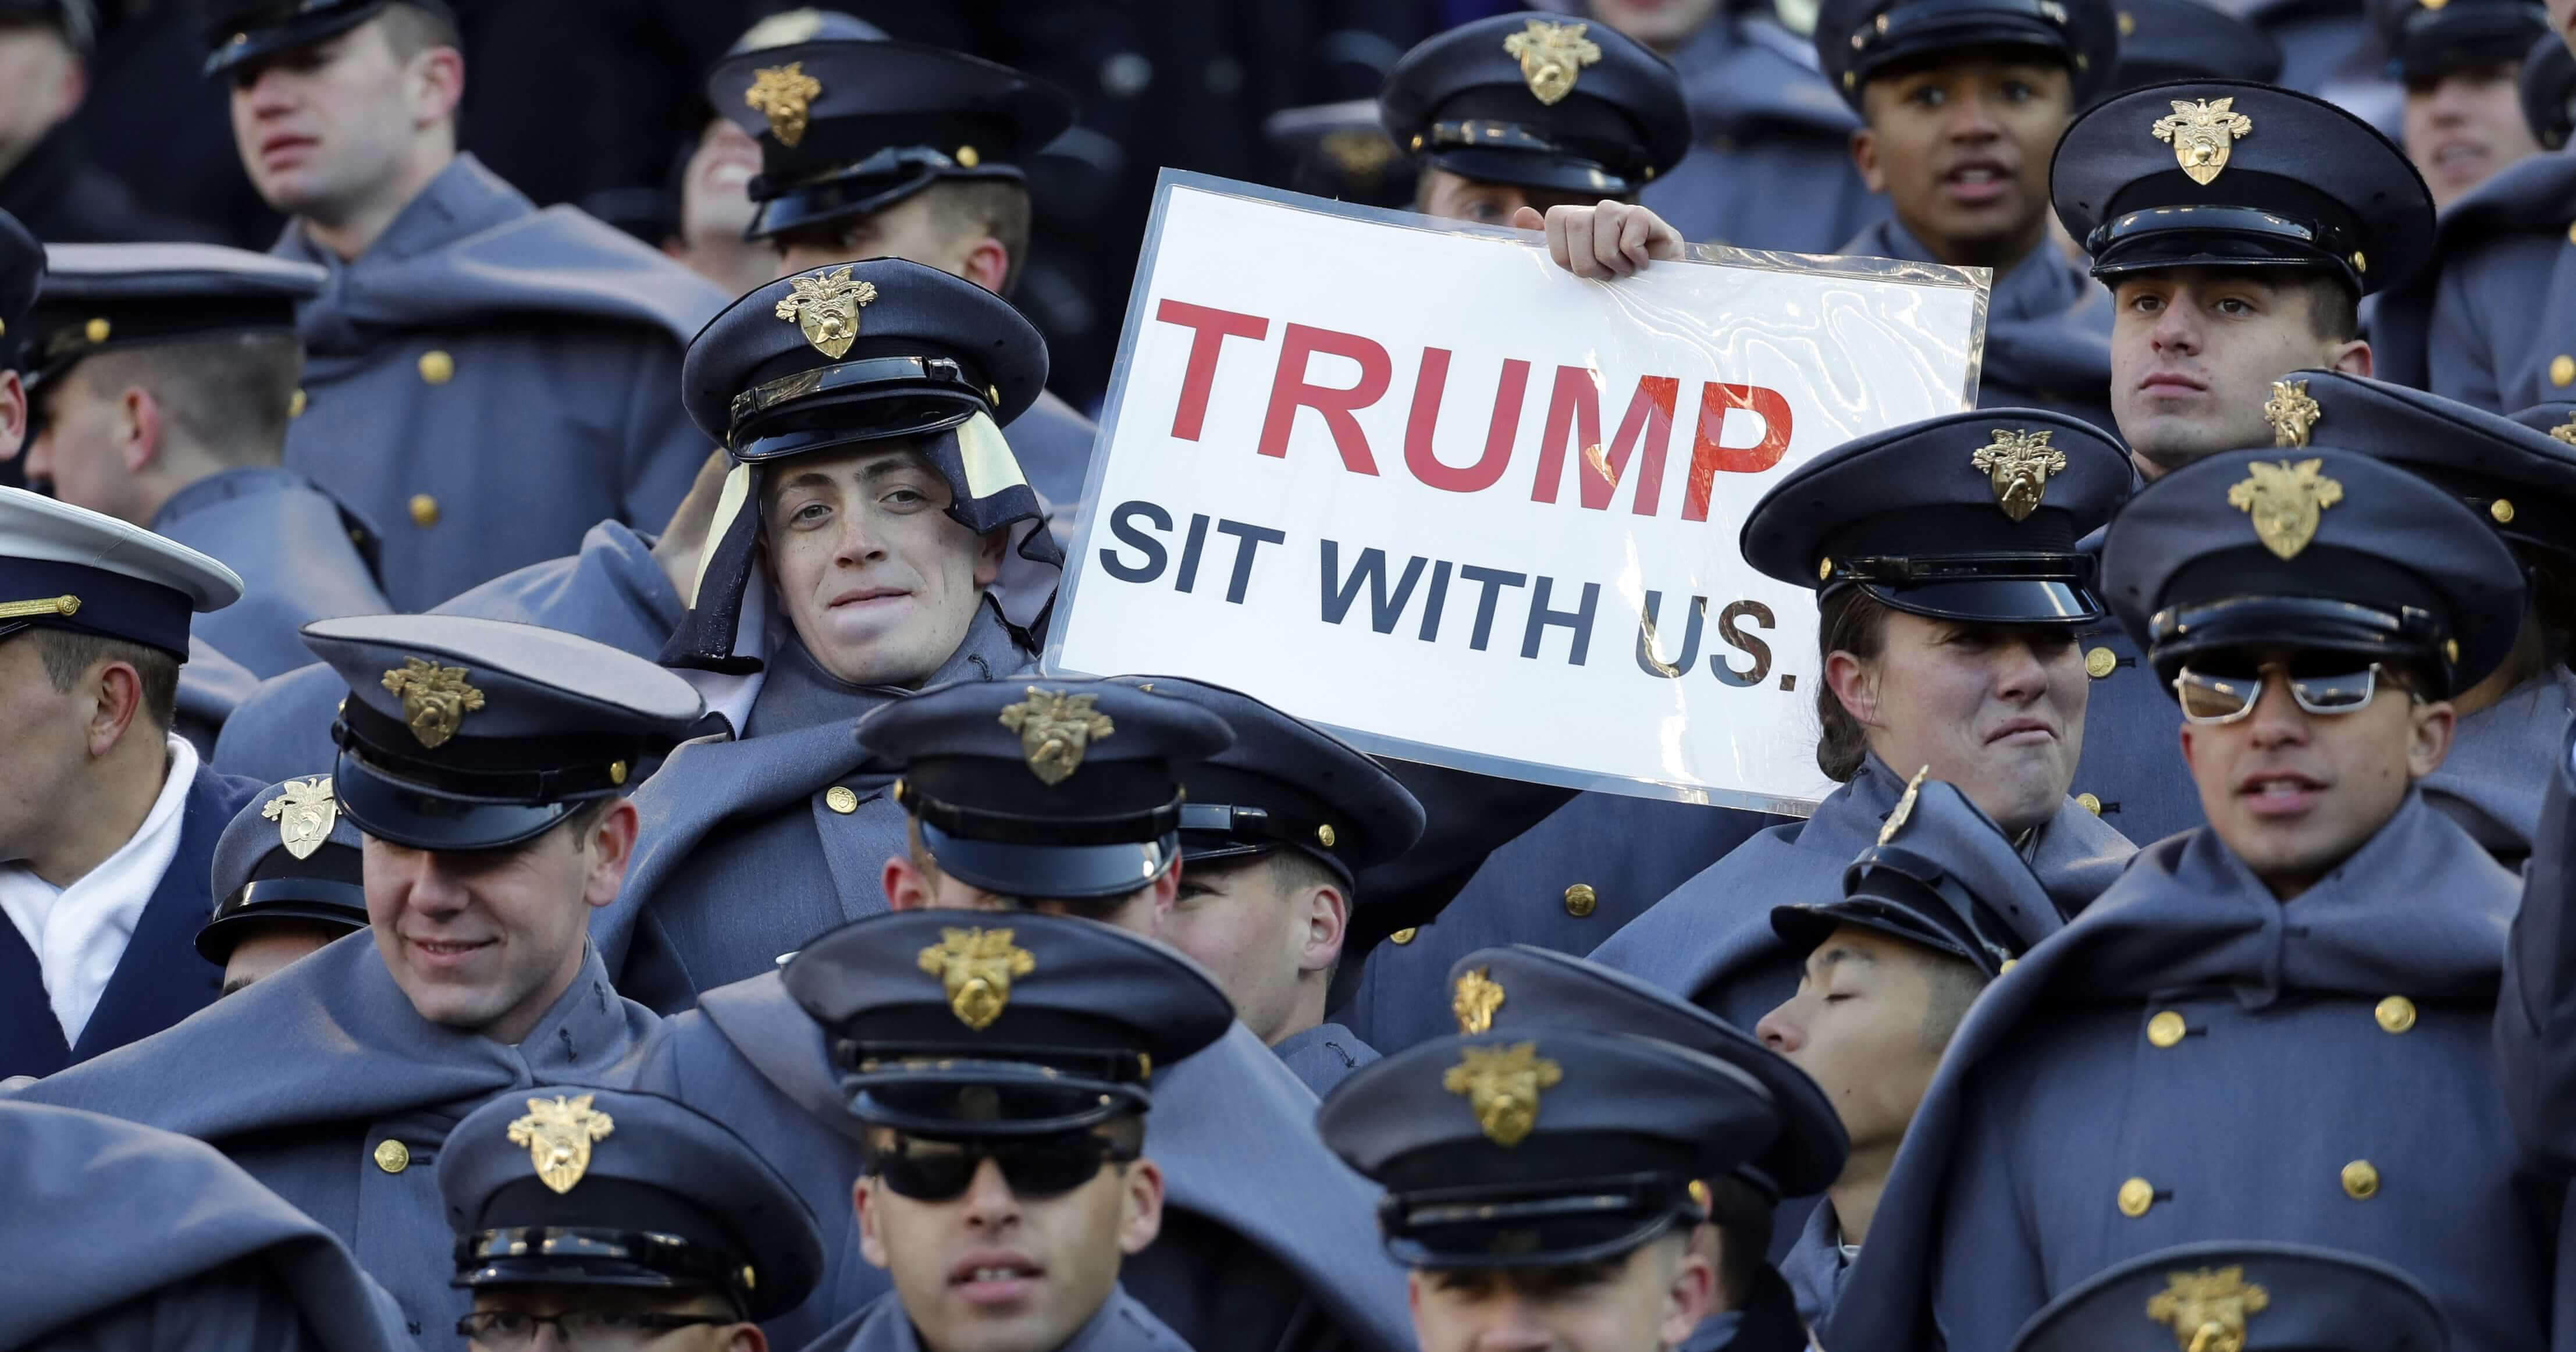 An Army cadet displays a sign for then President-elect Donald Trump during the 2016 Army-Navy game in Baltimore.